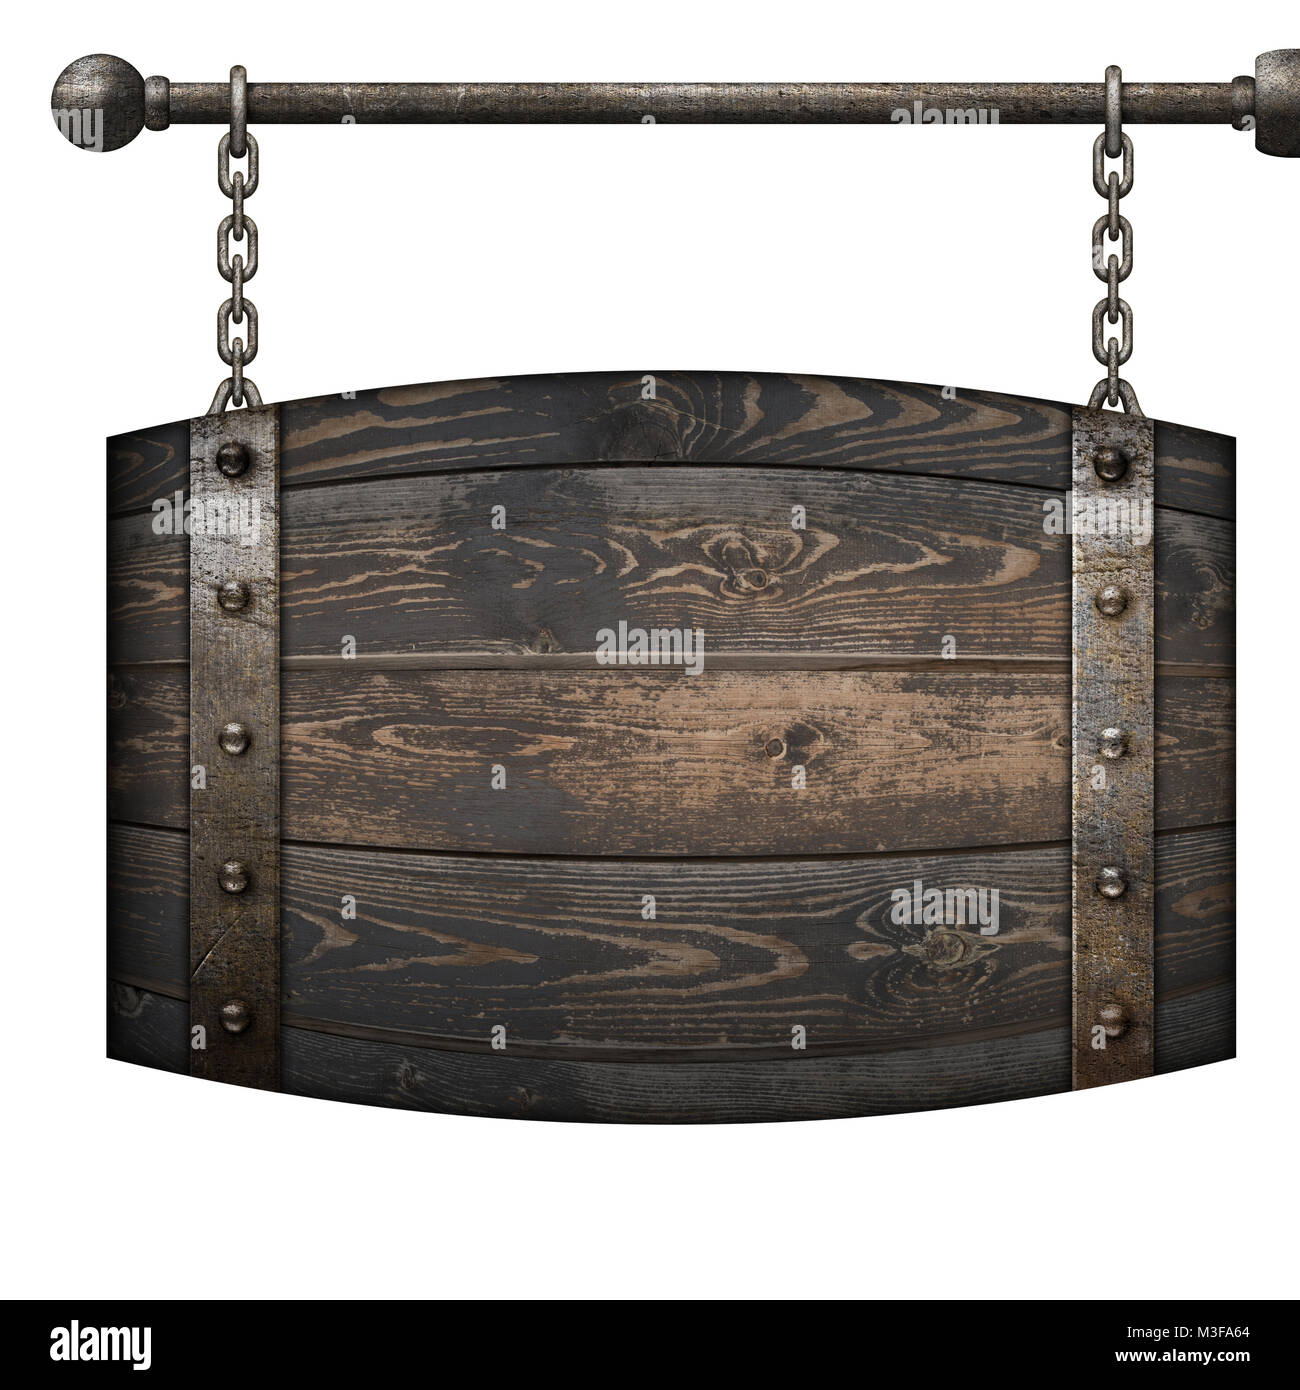 Wooden barrel medieval signboard hanging on chains isolated 3d illustration Stock Photo